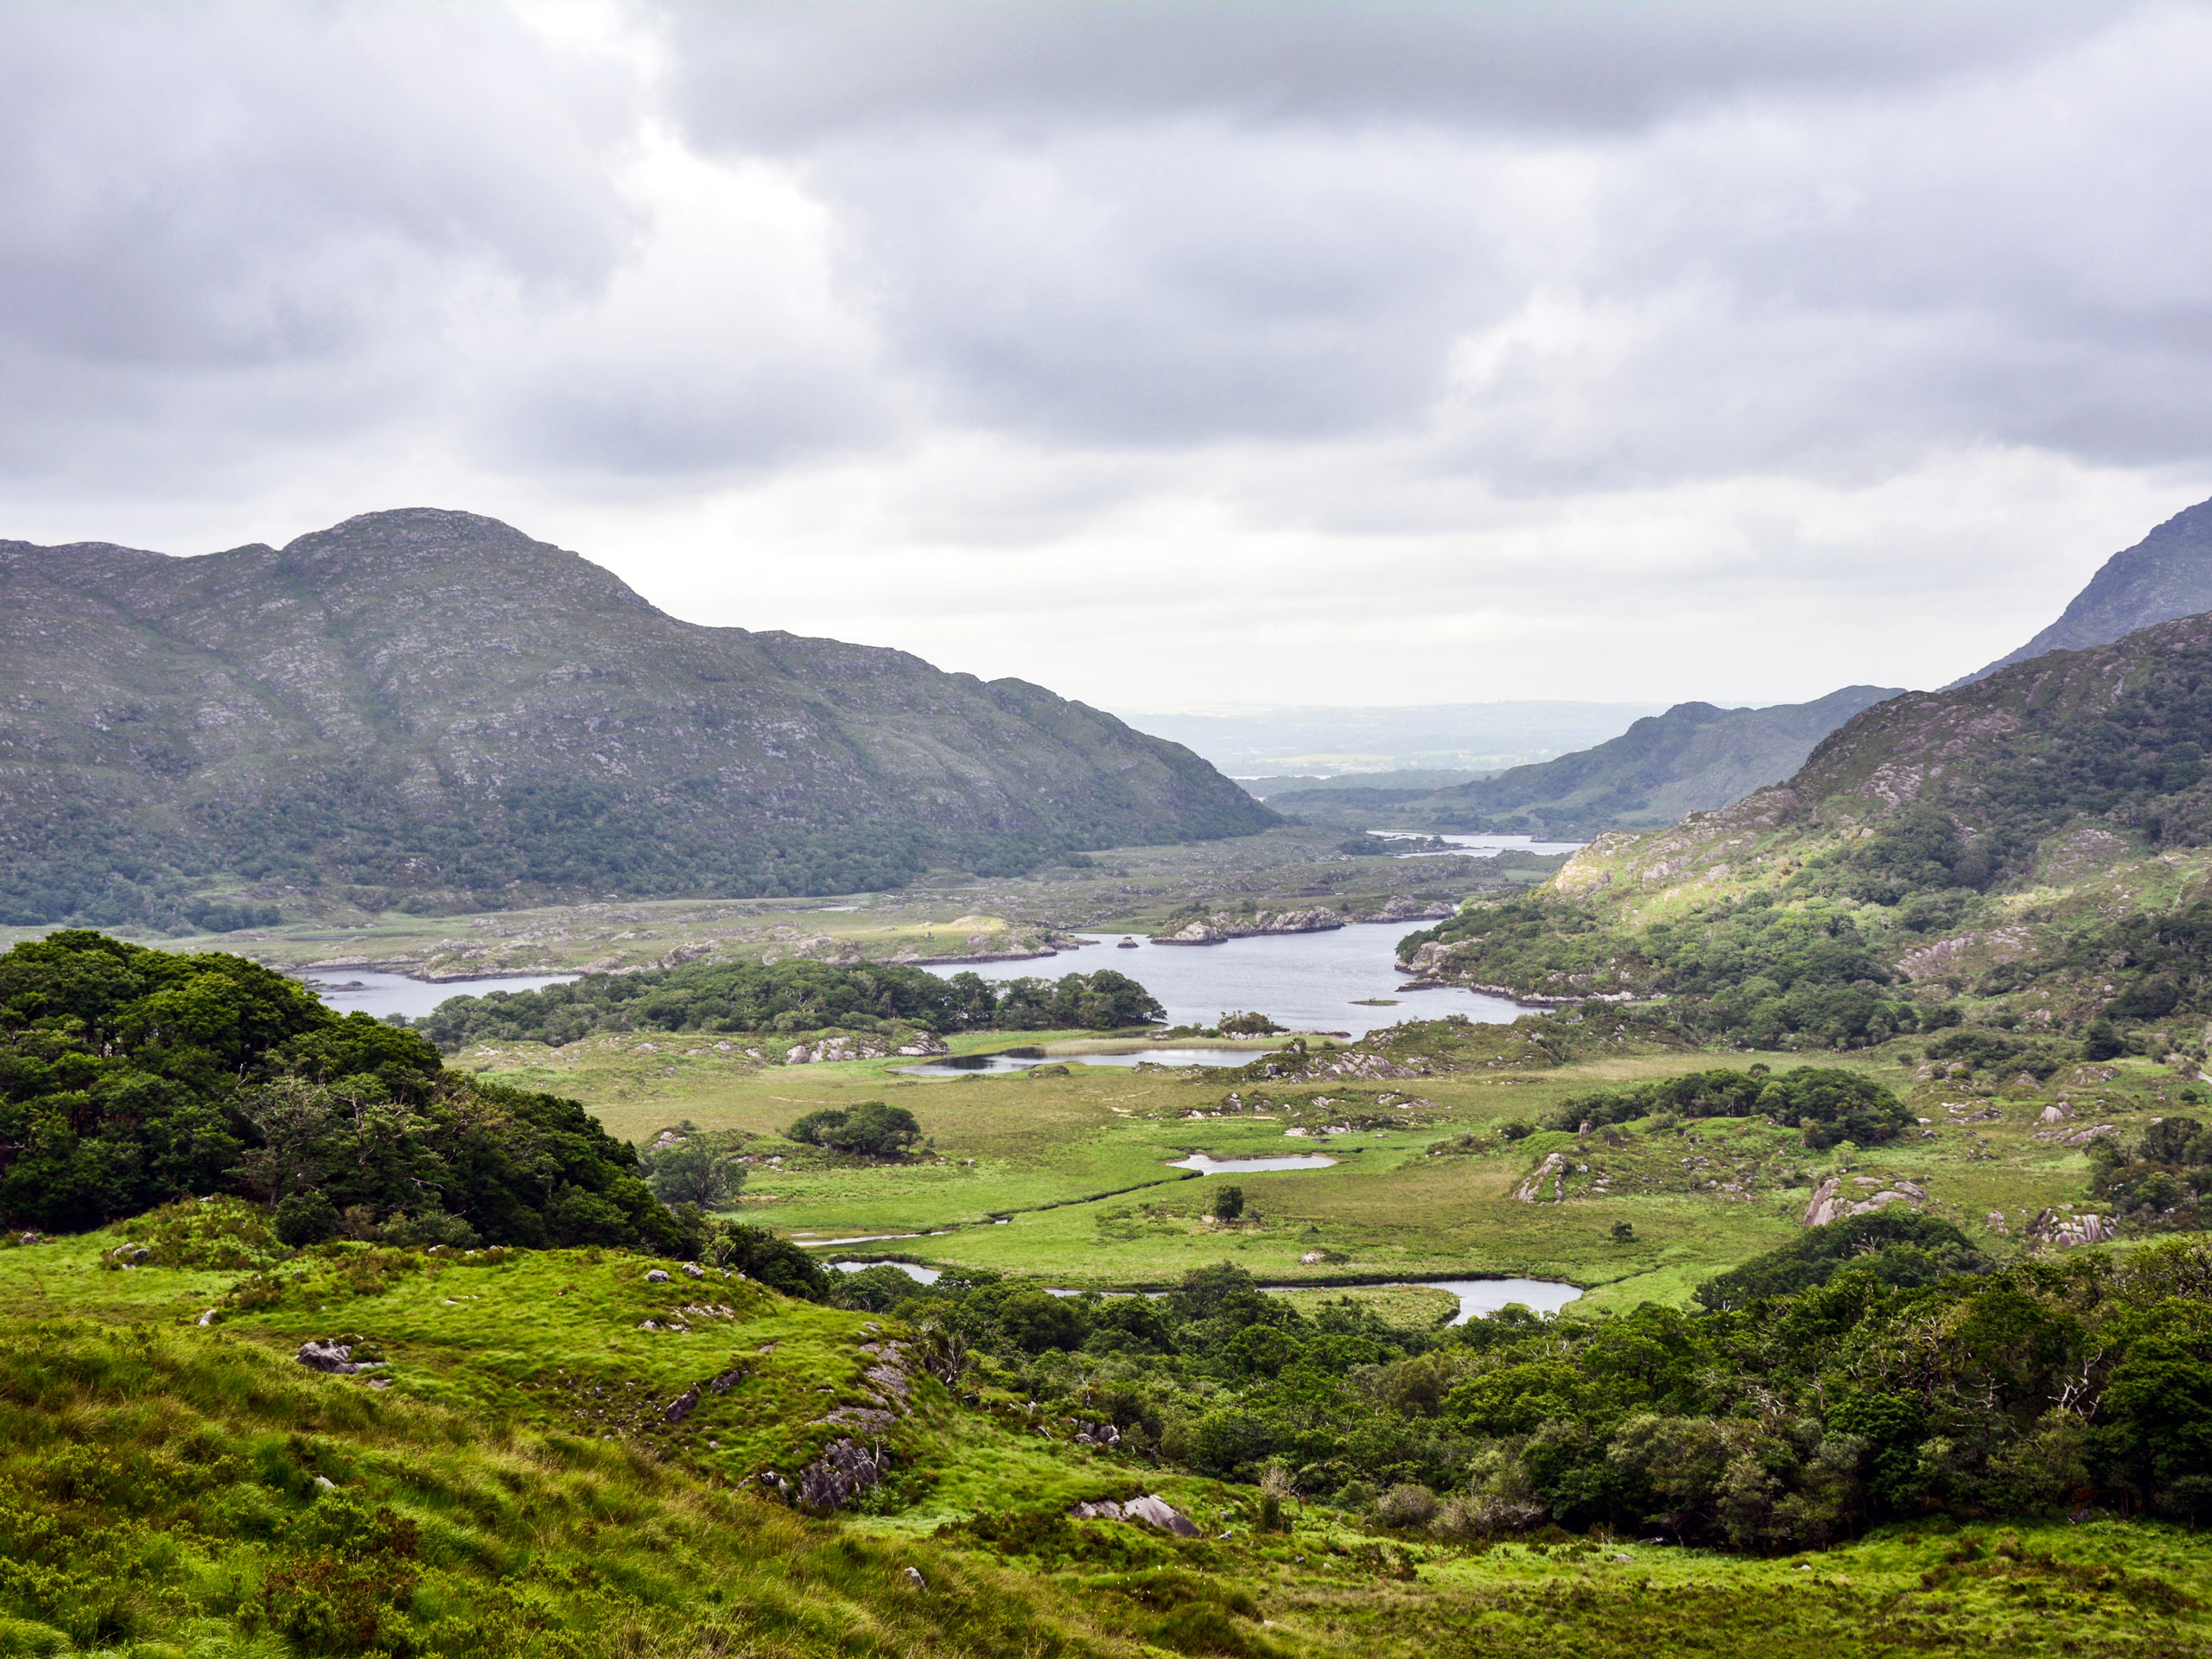 Hills and mountain landscape in Ireland